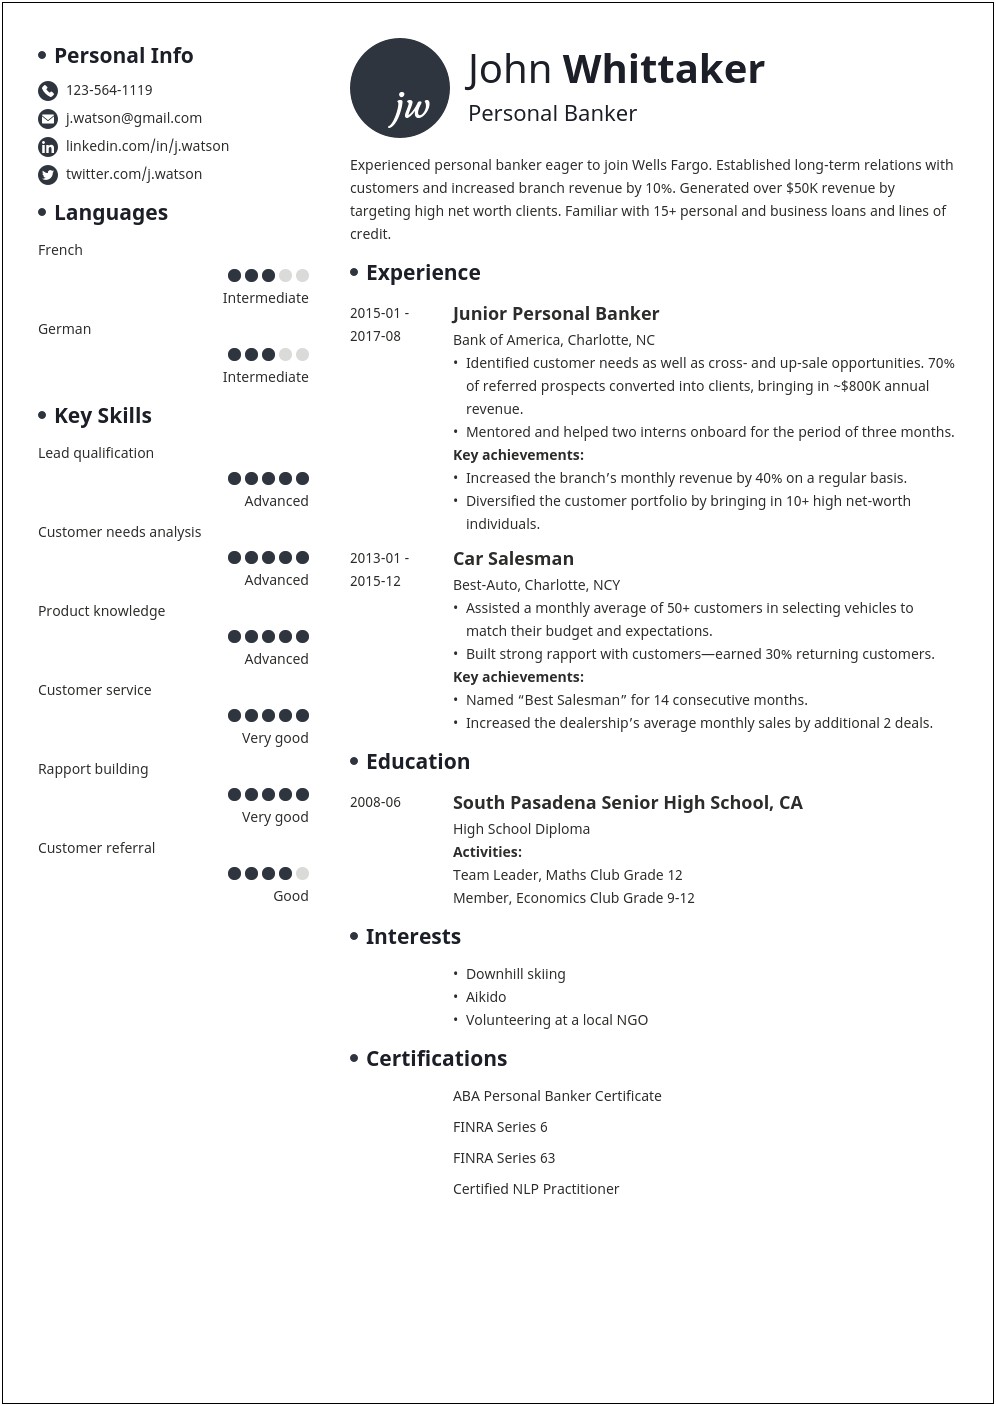 Example Of Retail Personal Banker Resume